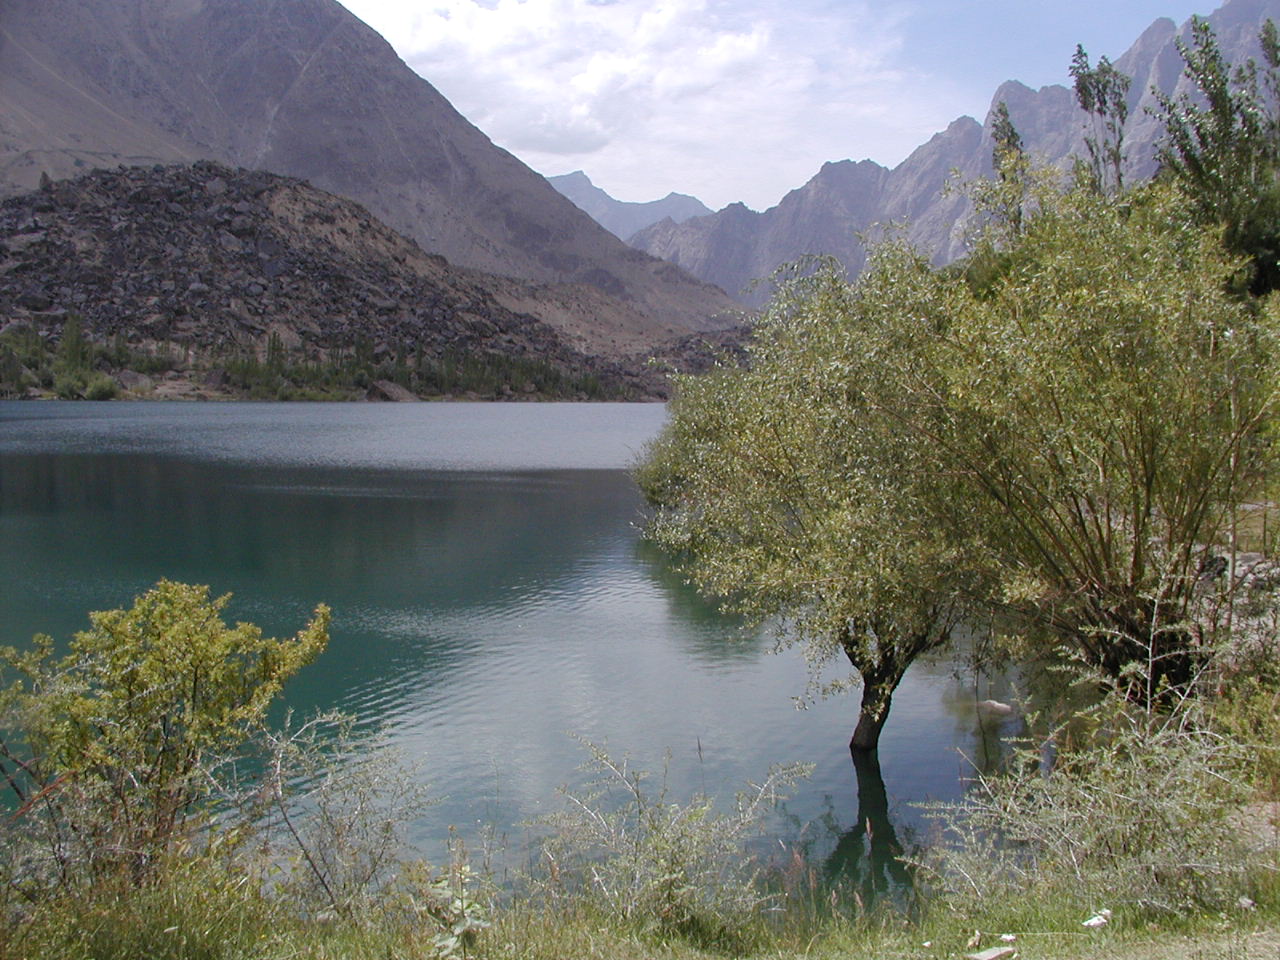 Or this one???? (Couldnt capture the whole lake in one Image, would have Had to Go Back a Long Way)